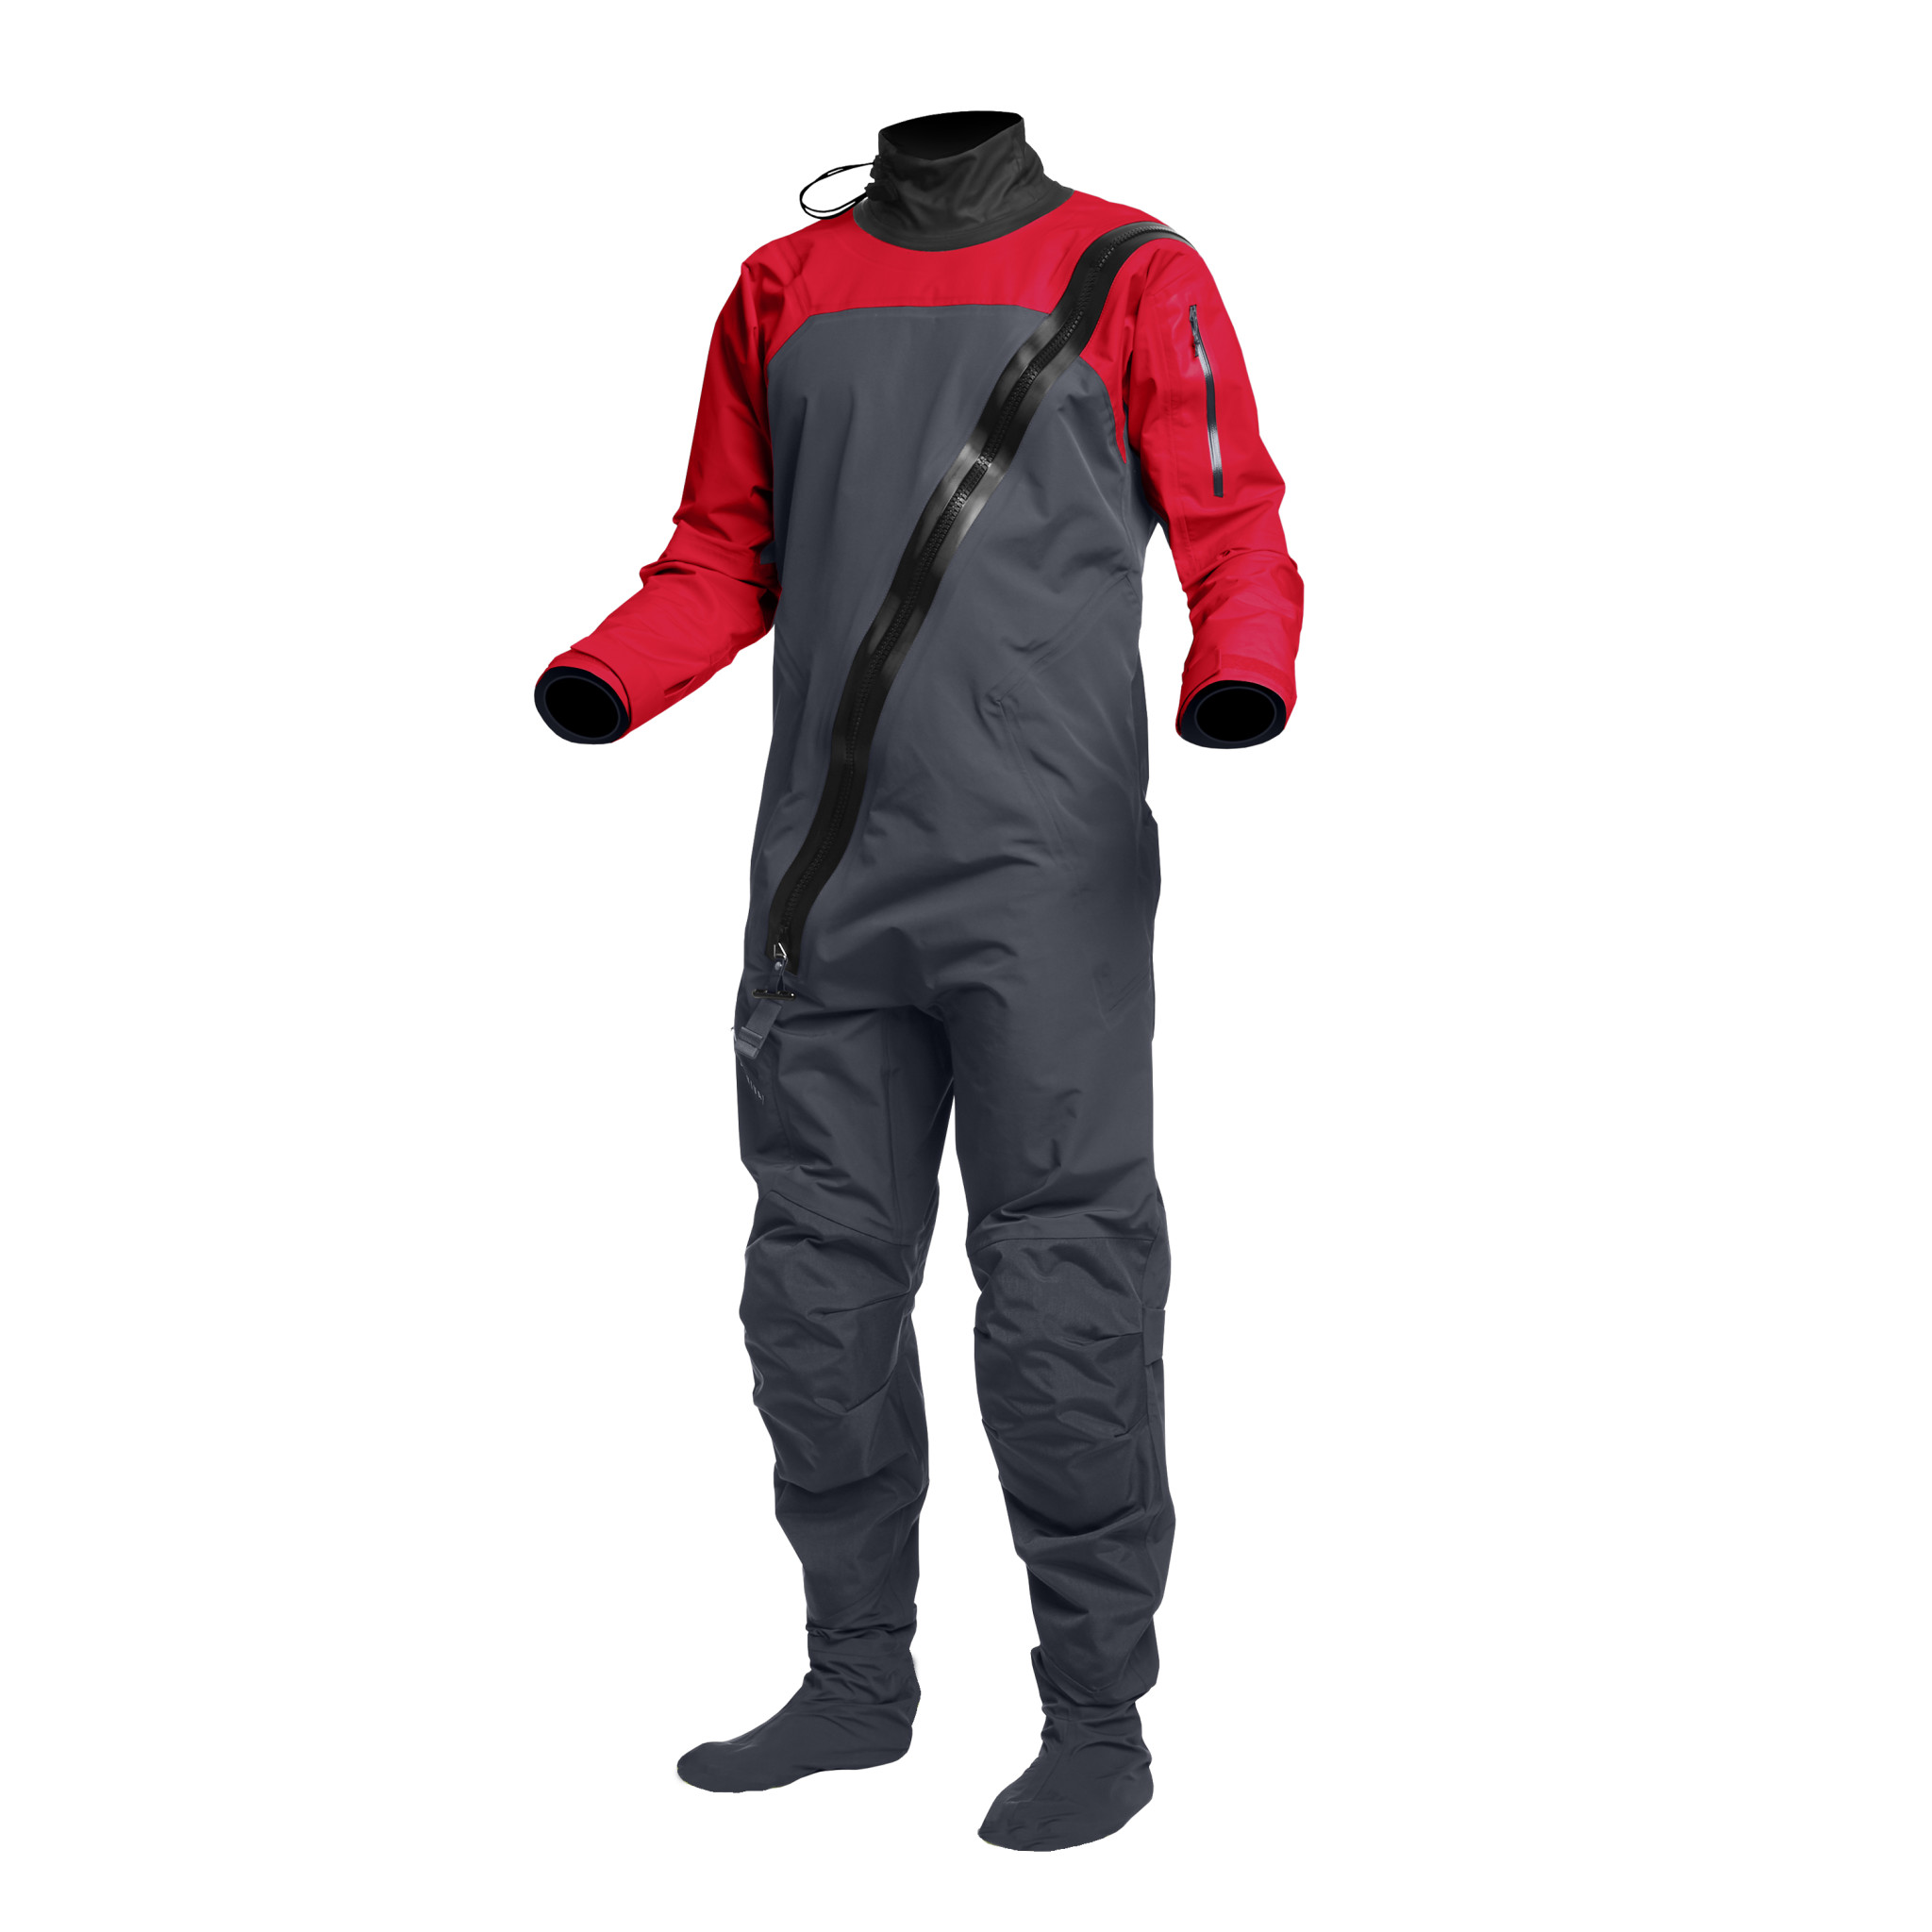 Technical Outerwear for Fishing - Dry Suits, Dry Pants, Bibs